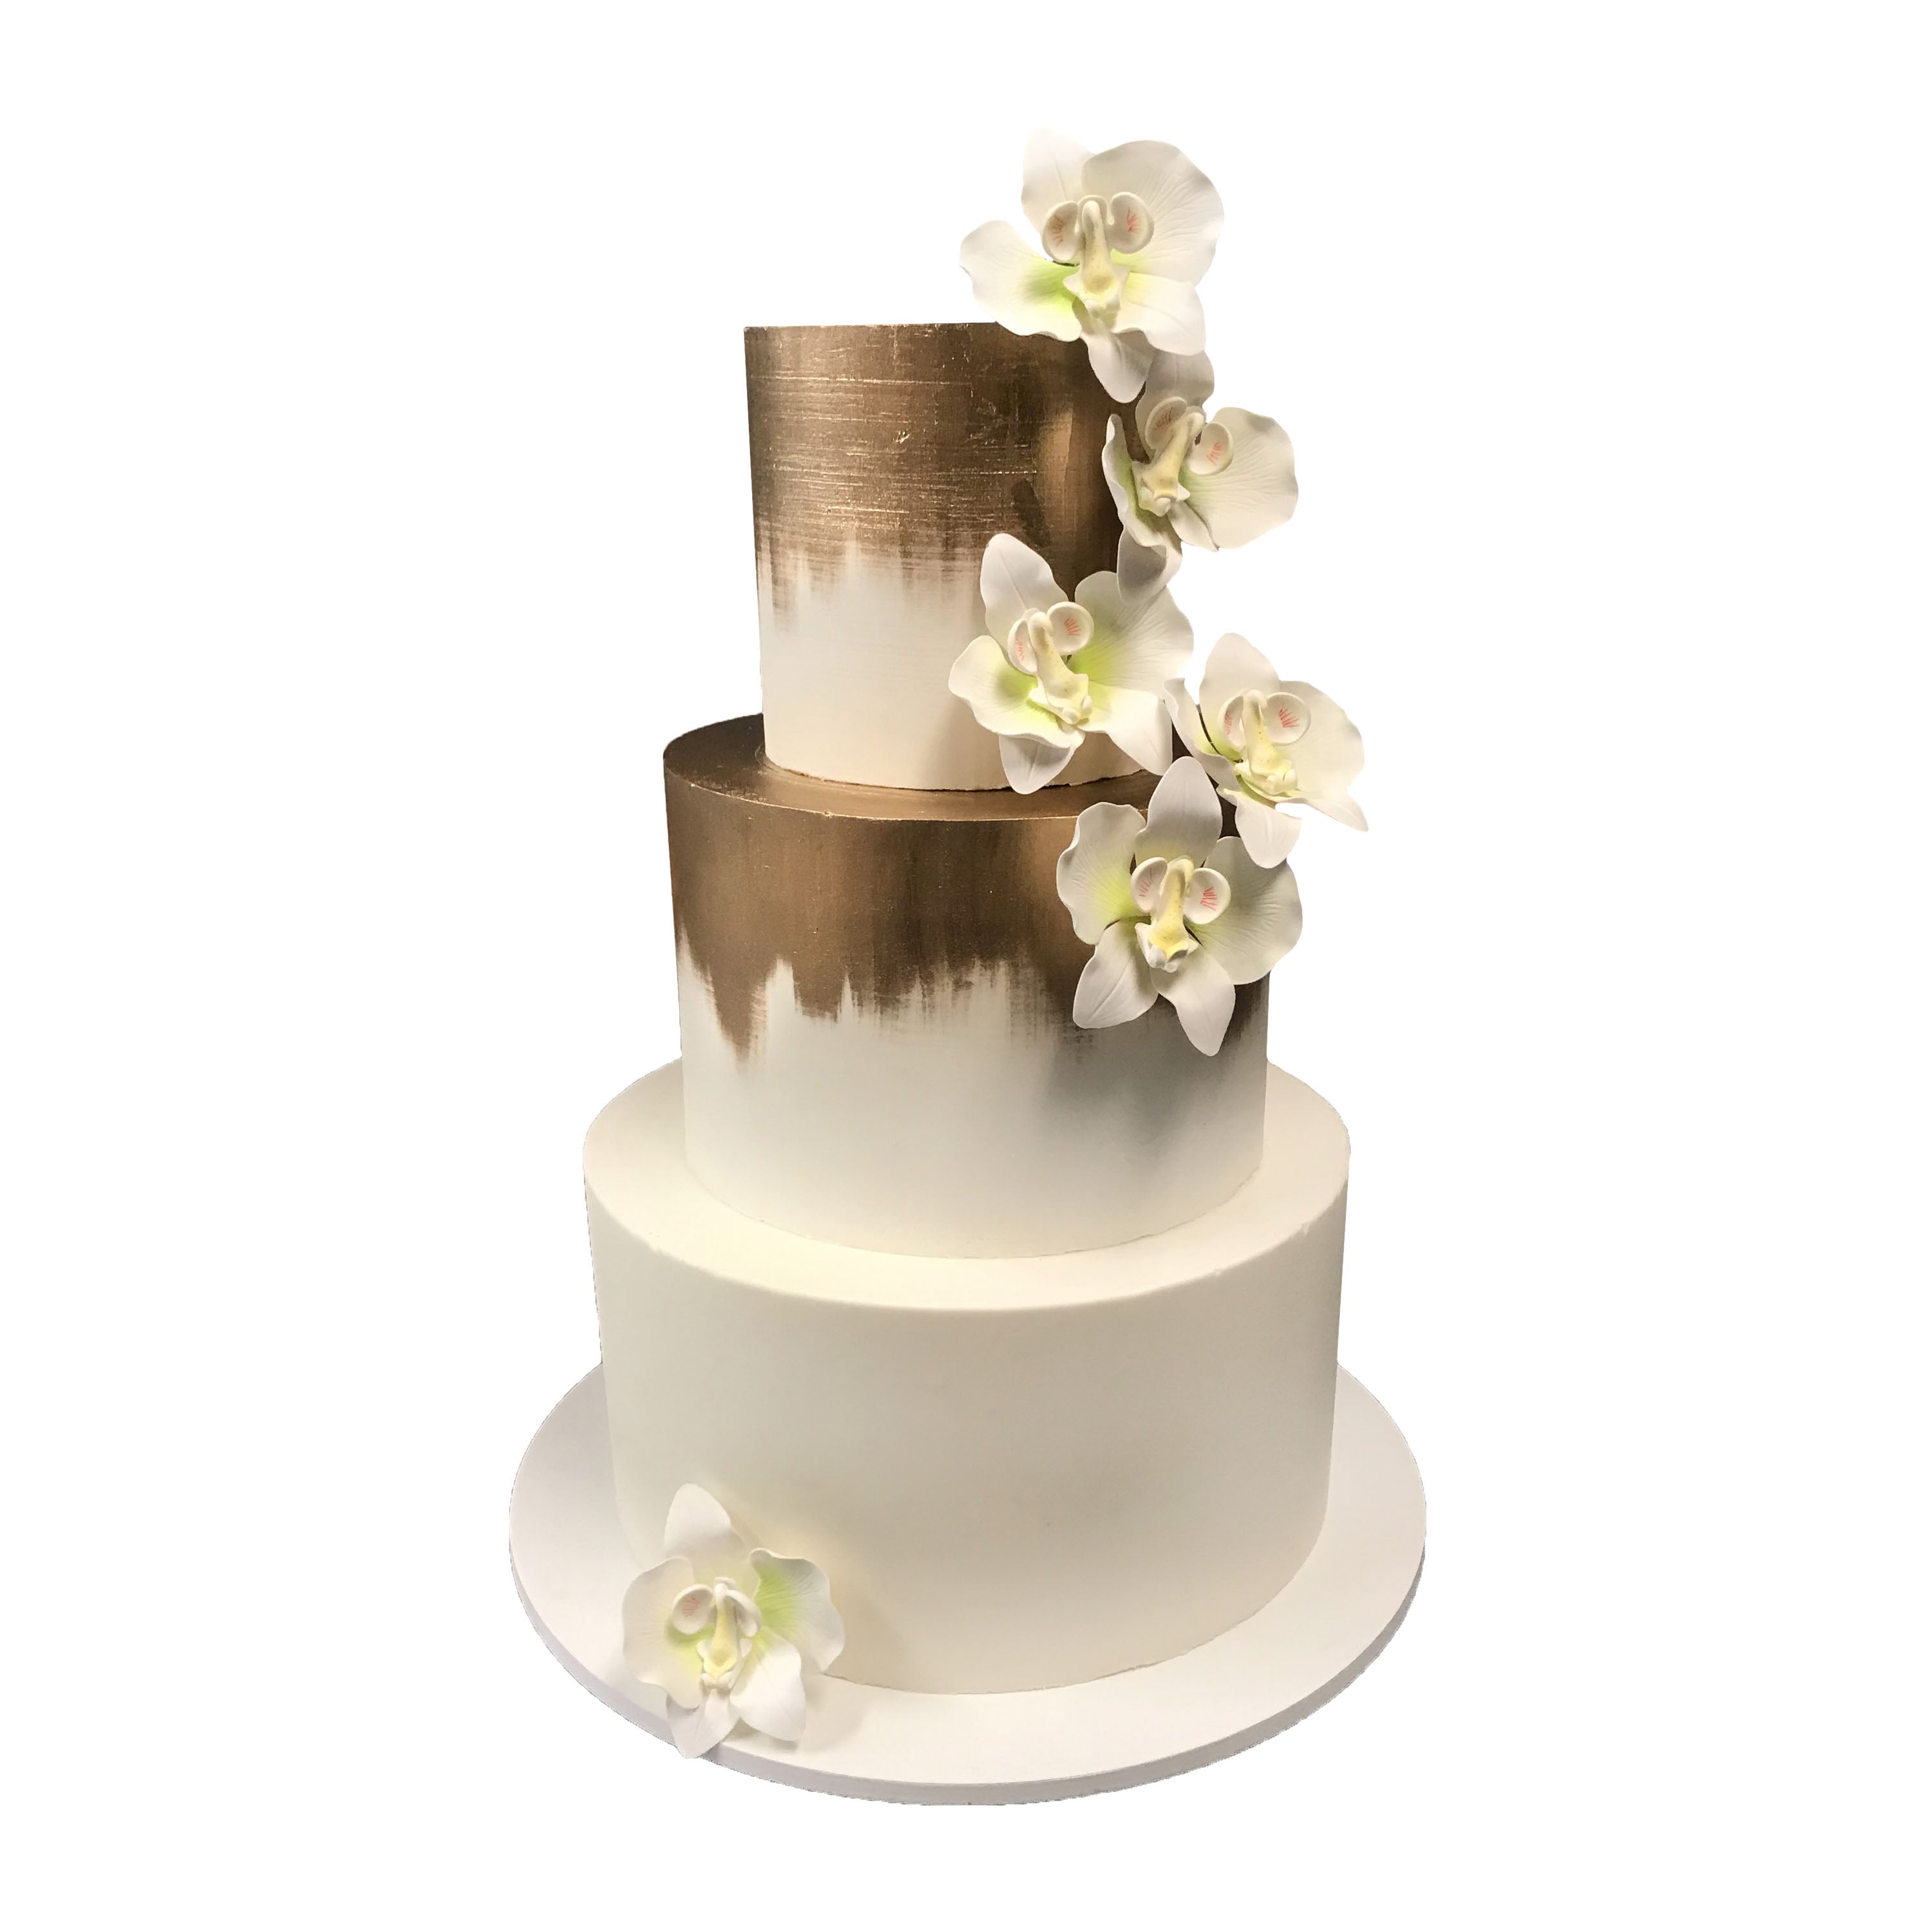 Marbleized, Gold and Black Fondant with Orchid - Empire Cake